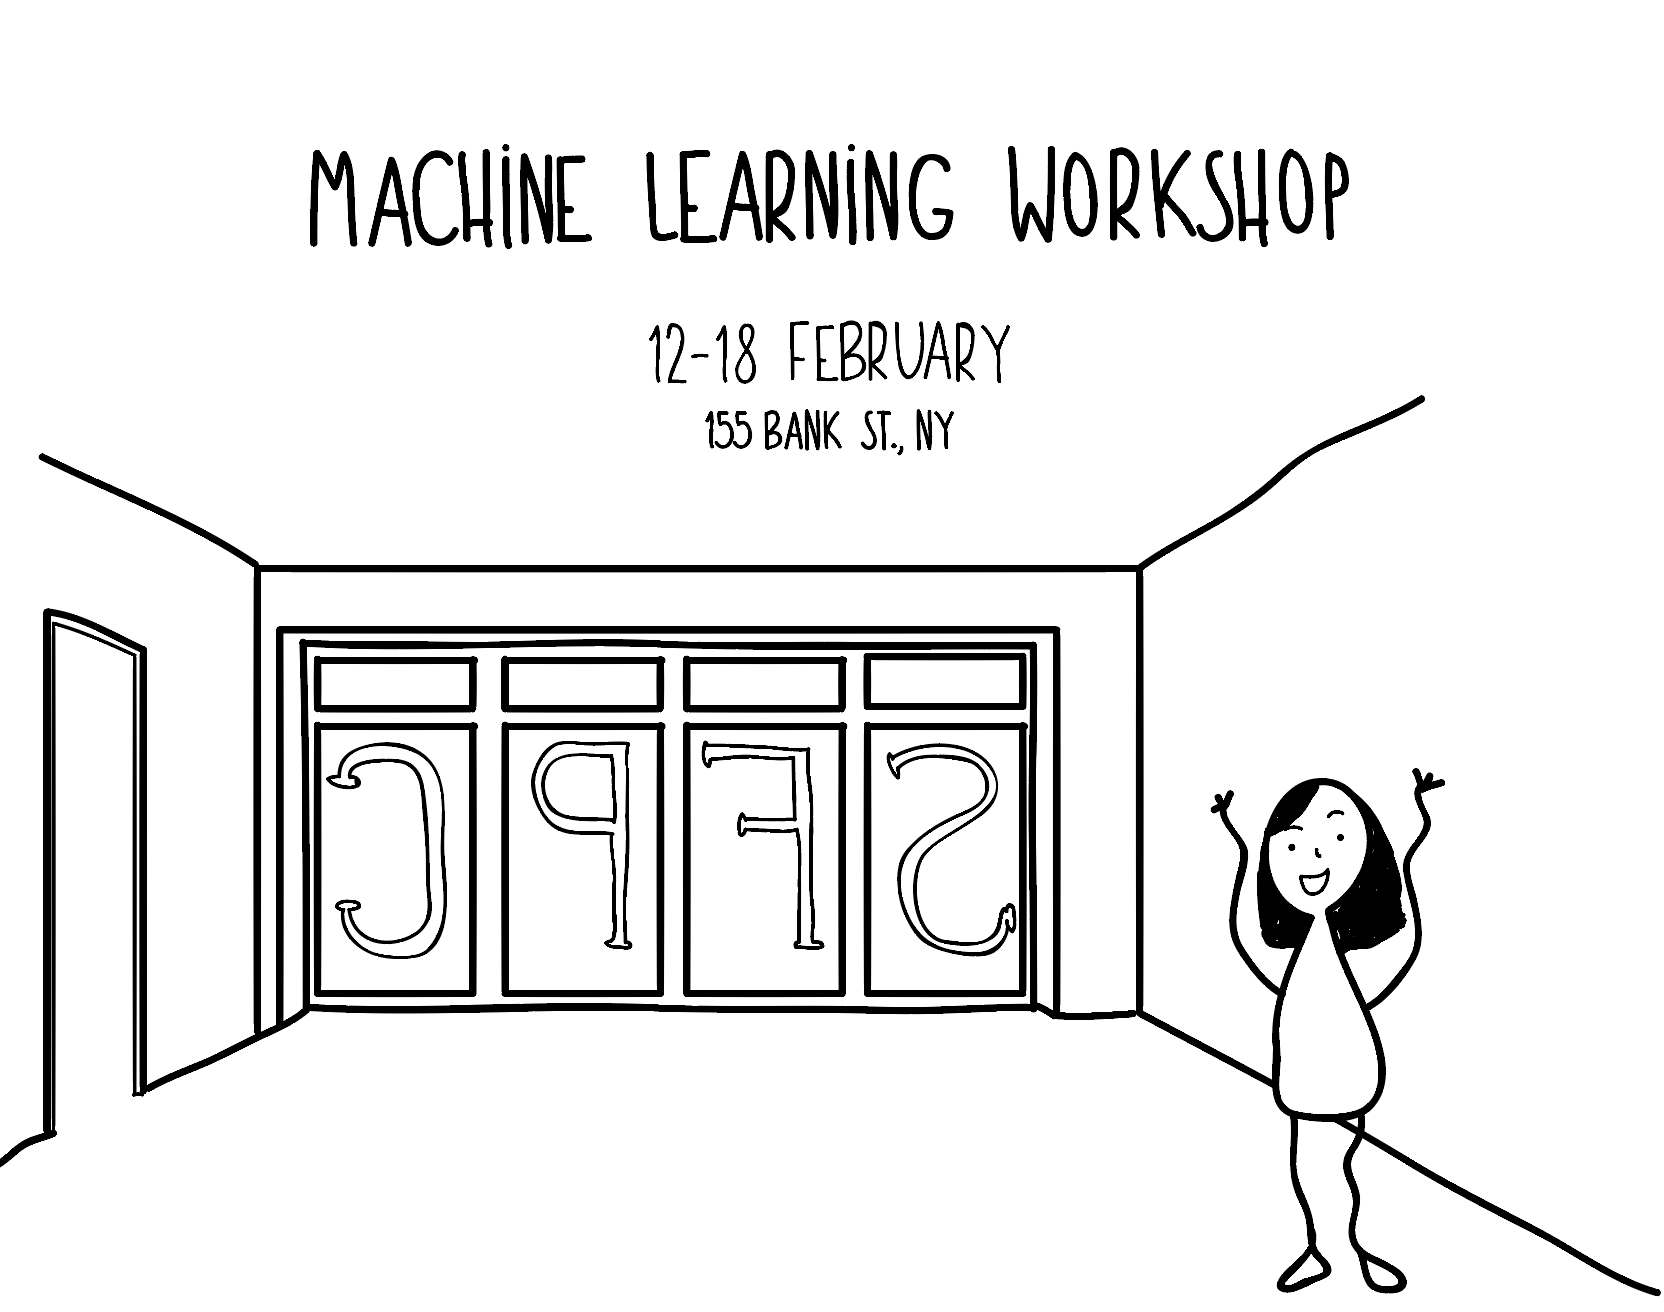 space with SFPC letters in window and person waving hands. Machine learning workshop 12-18th February, 155 Bank St. NY